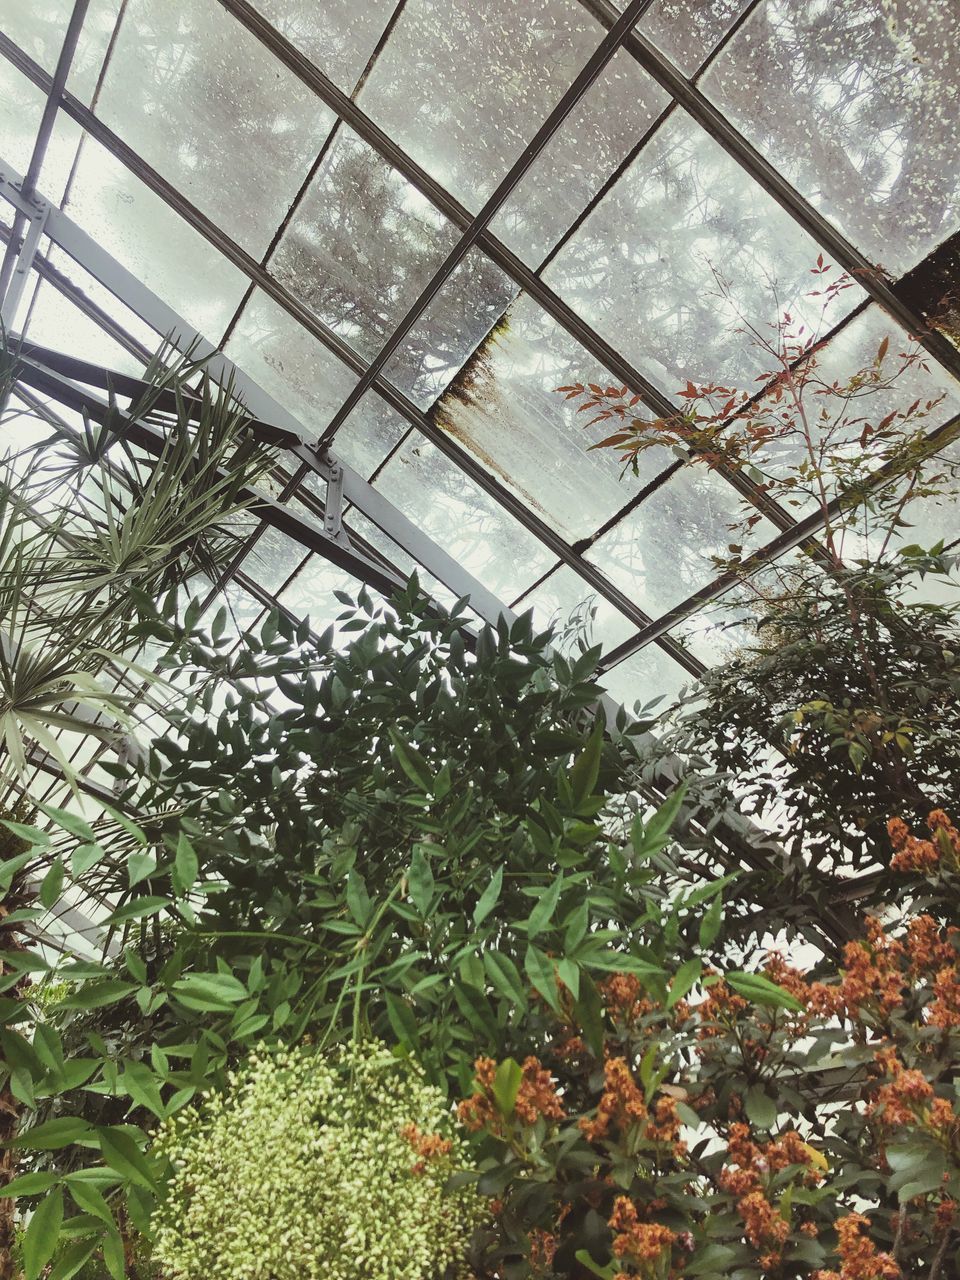 LOW ANGLE VIEW OF PLANTS IN GREENHOUSE